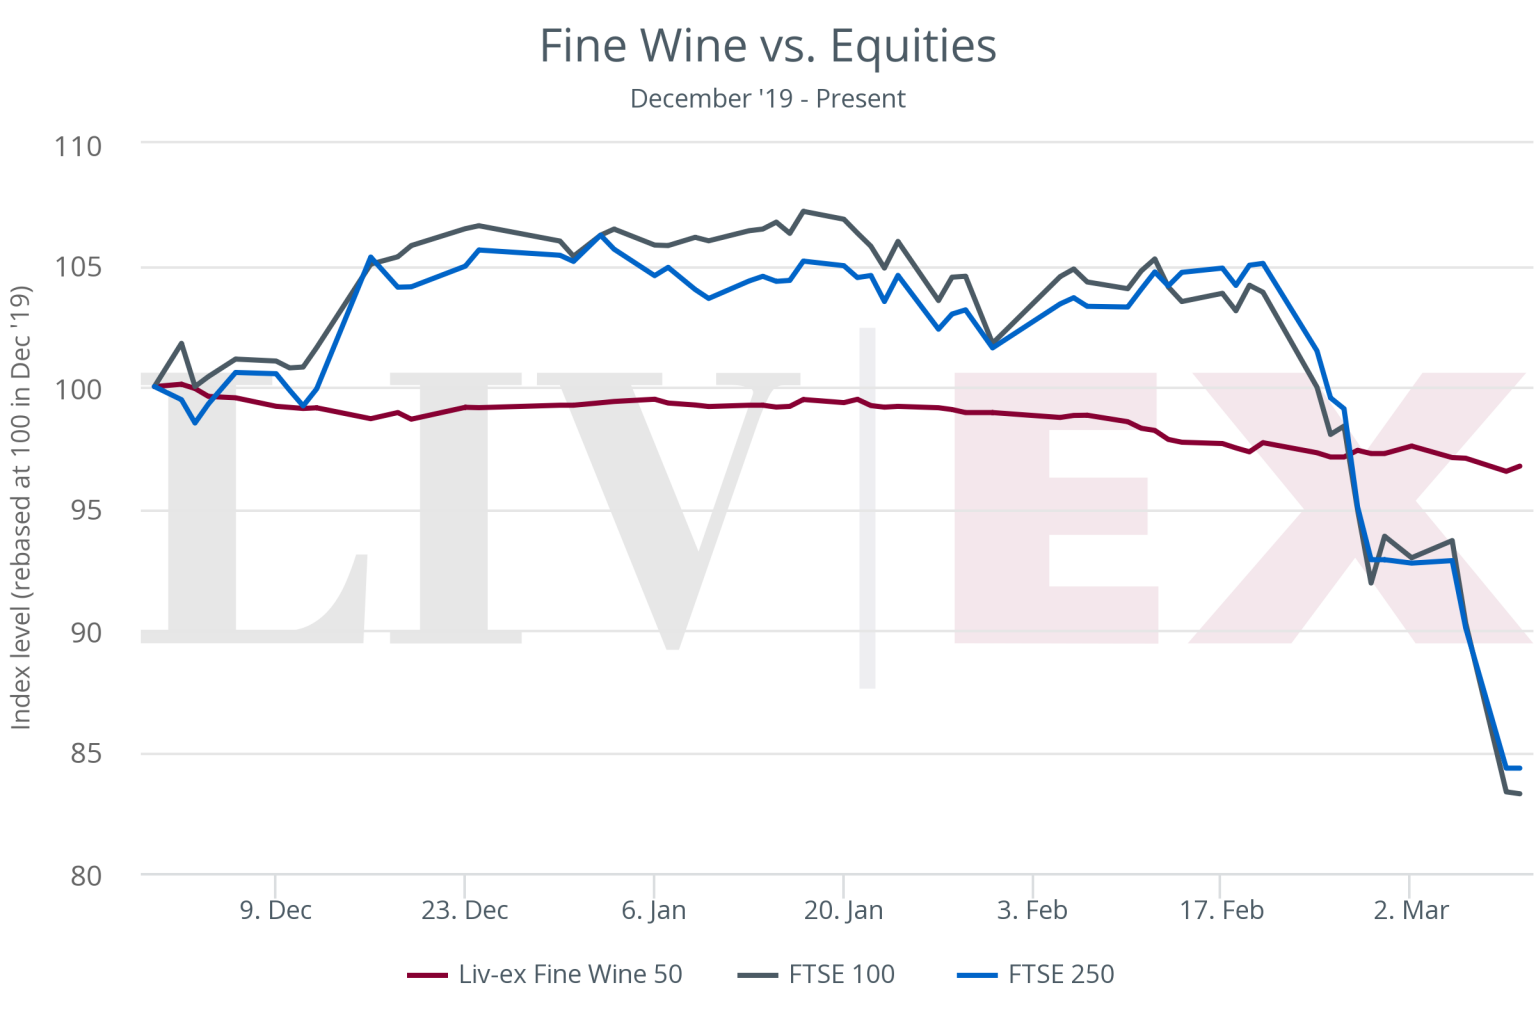 Amid global Covid-19 uncertainty fine wine offers stability